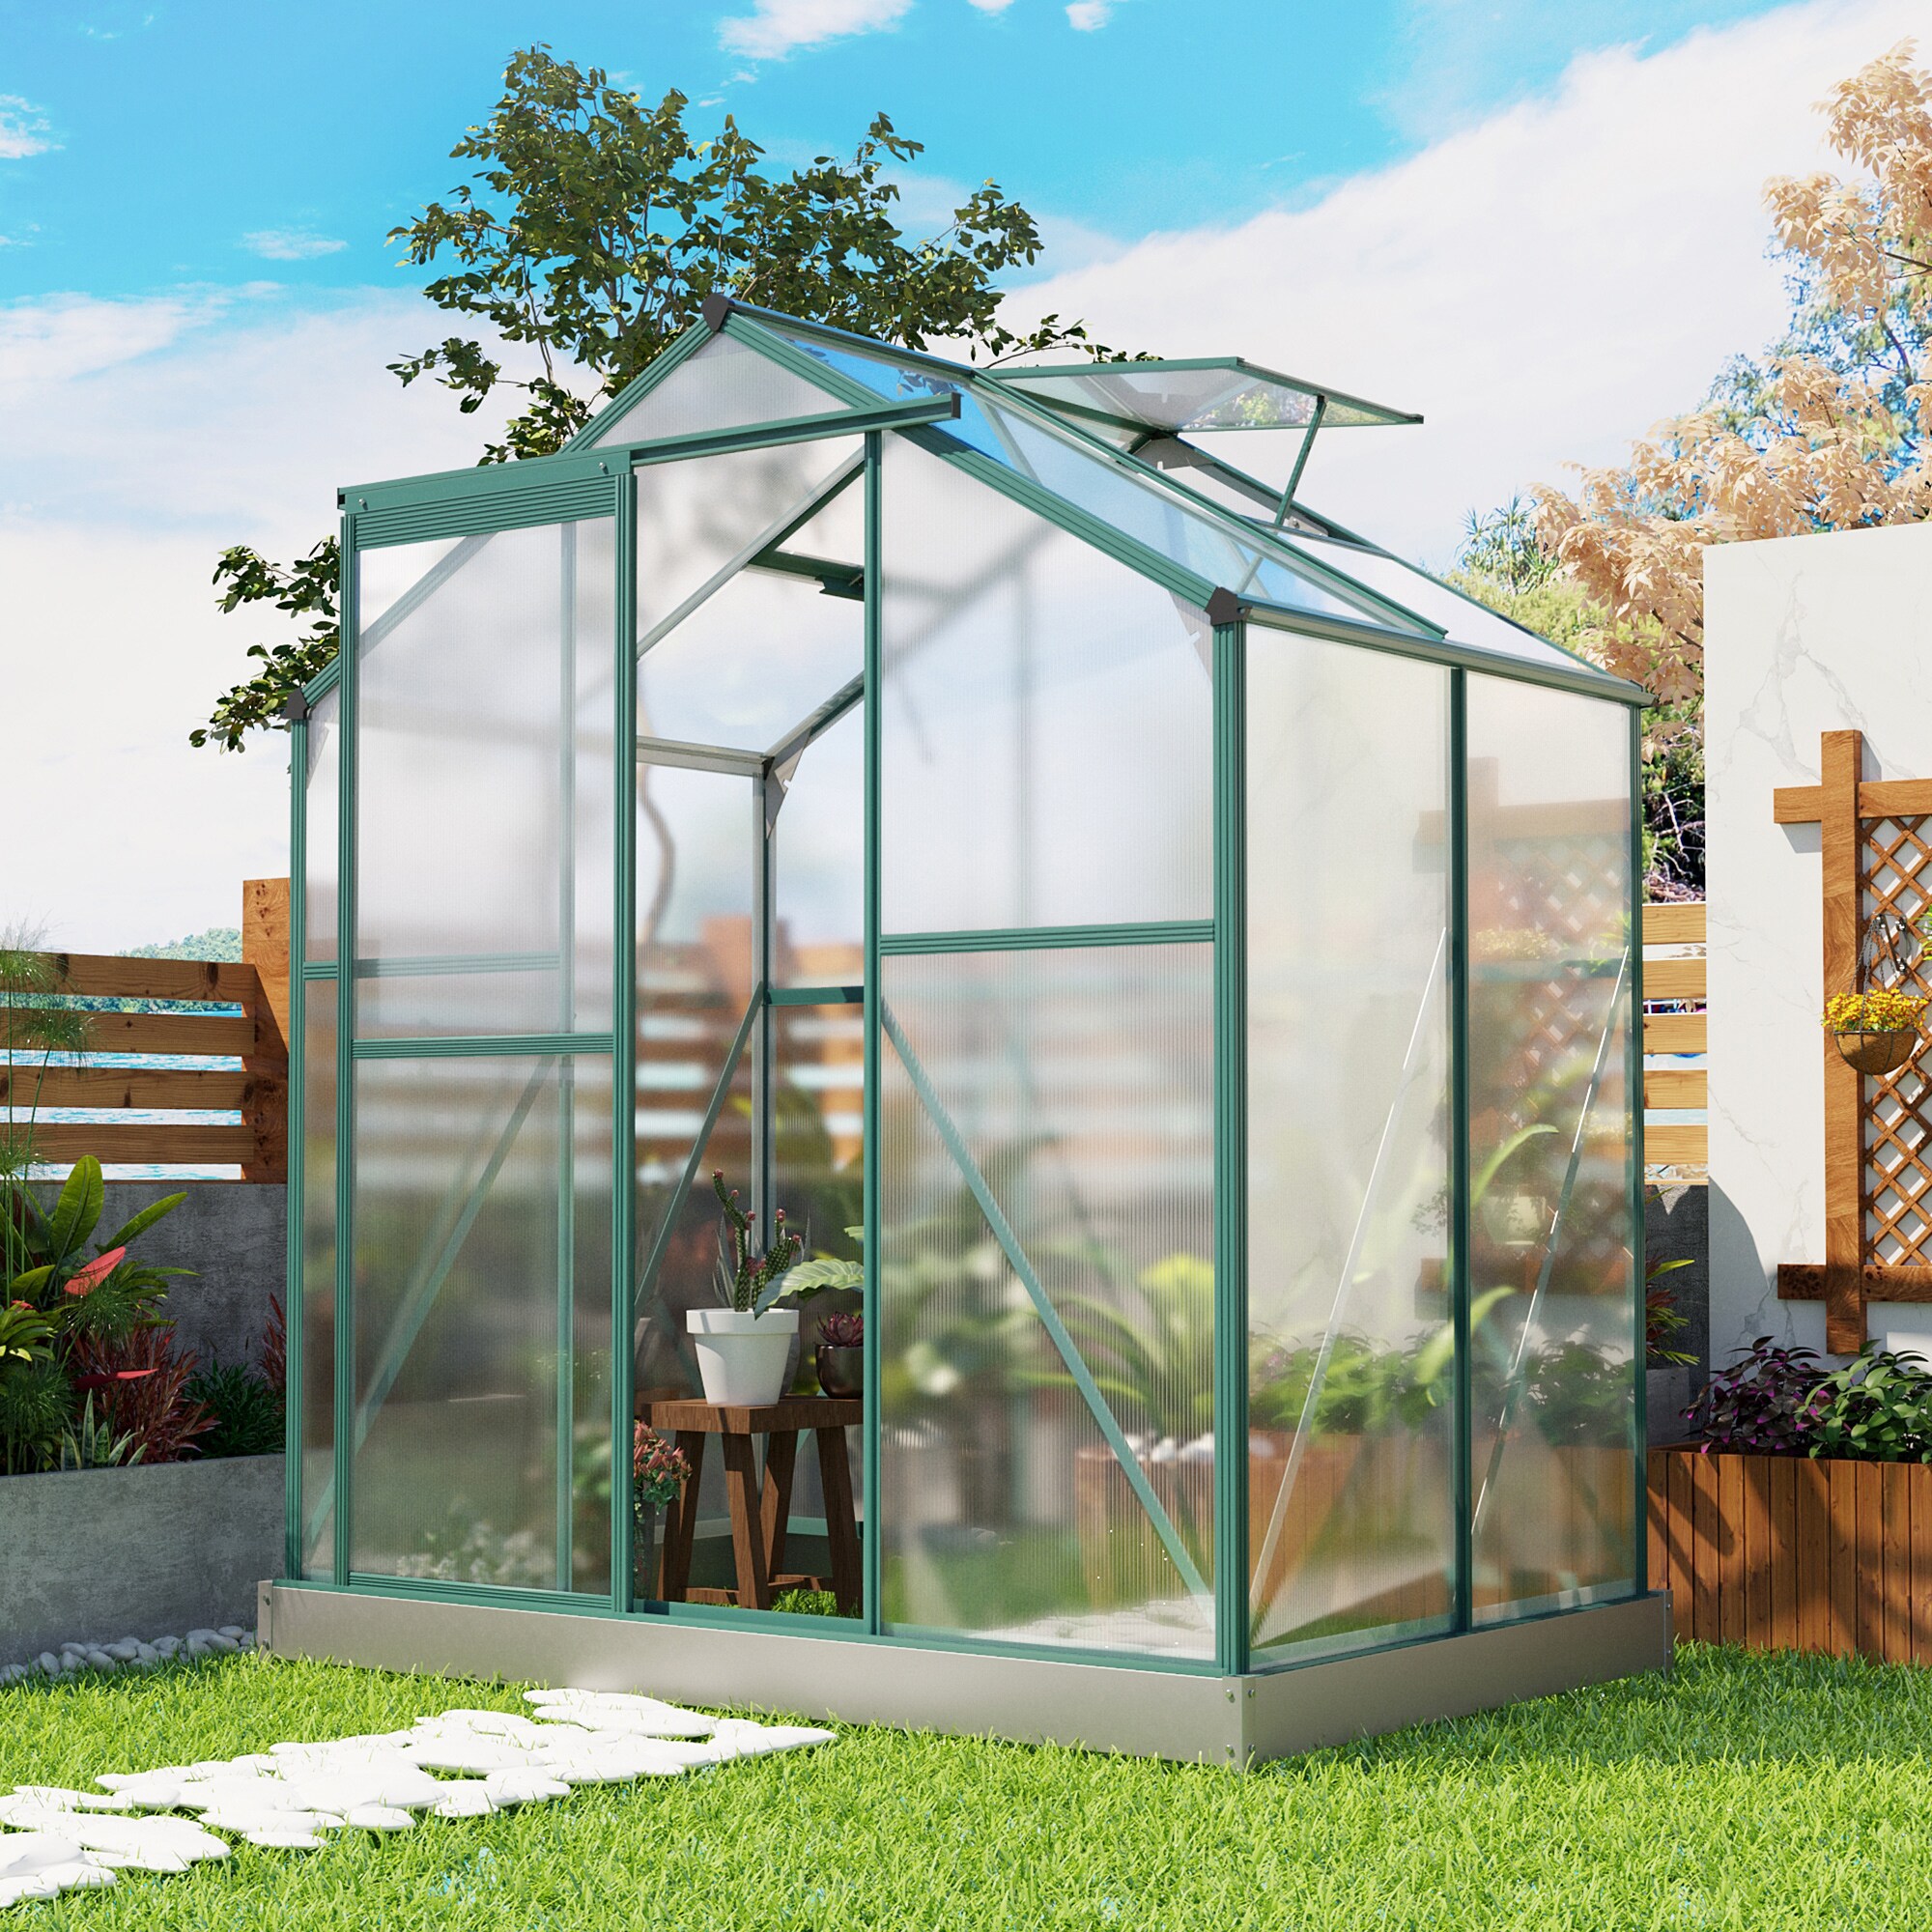 Gardenised Green Outdoor Waterproof Portable Plant Greenhouse with 2 Clear Zippered Windows Large